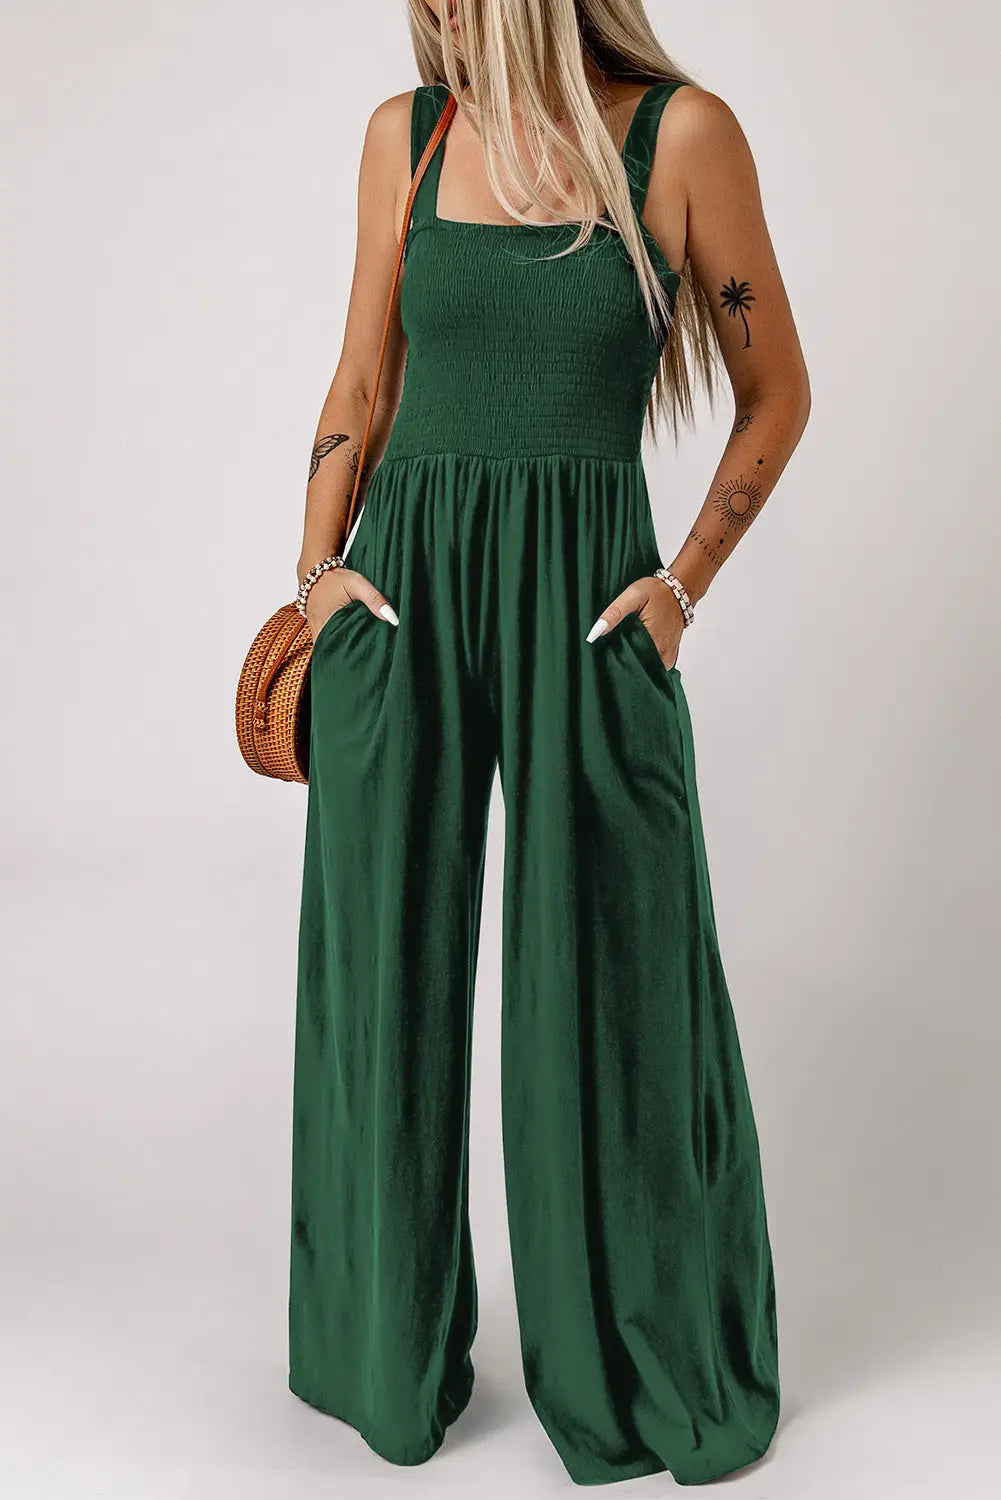 Black smocked square neck long sleeve wide leg jumpsuit - green1 / s / 100% polyester - jumpsuits & rompers